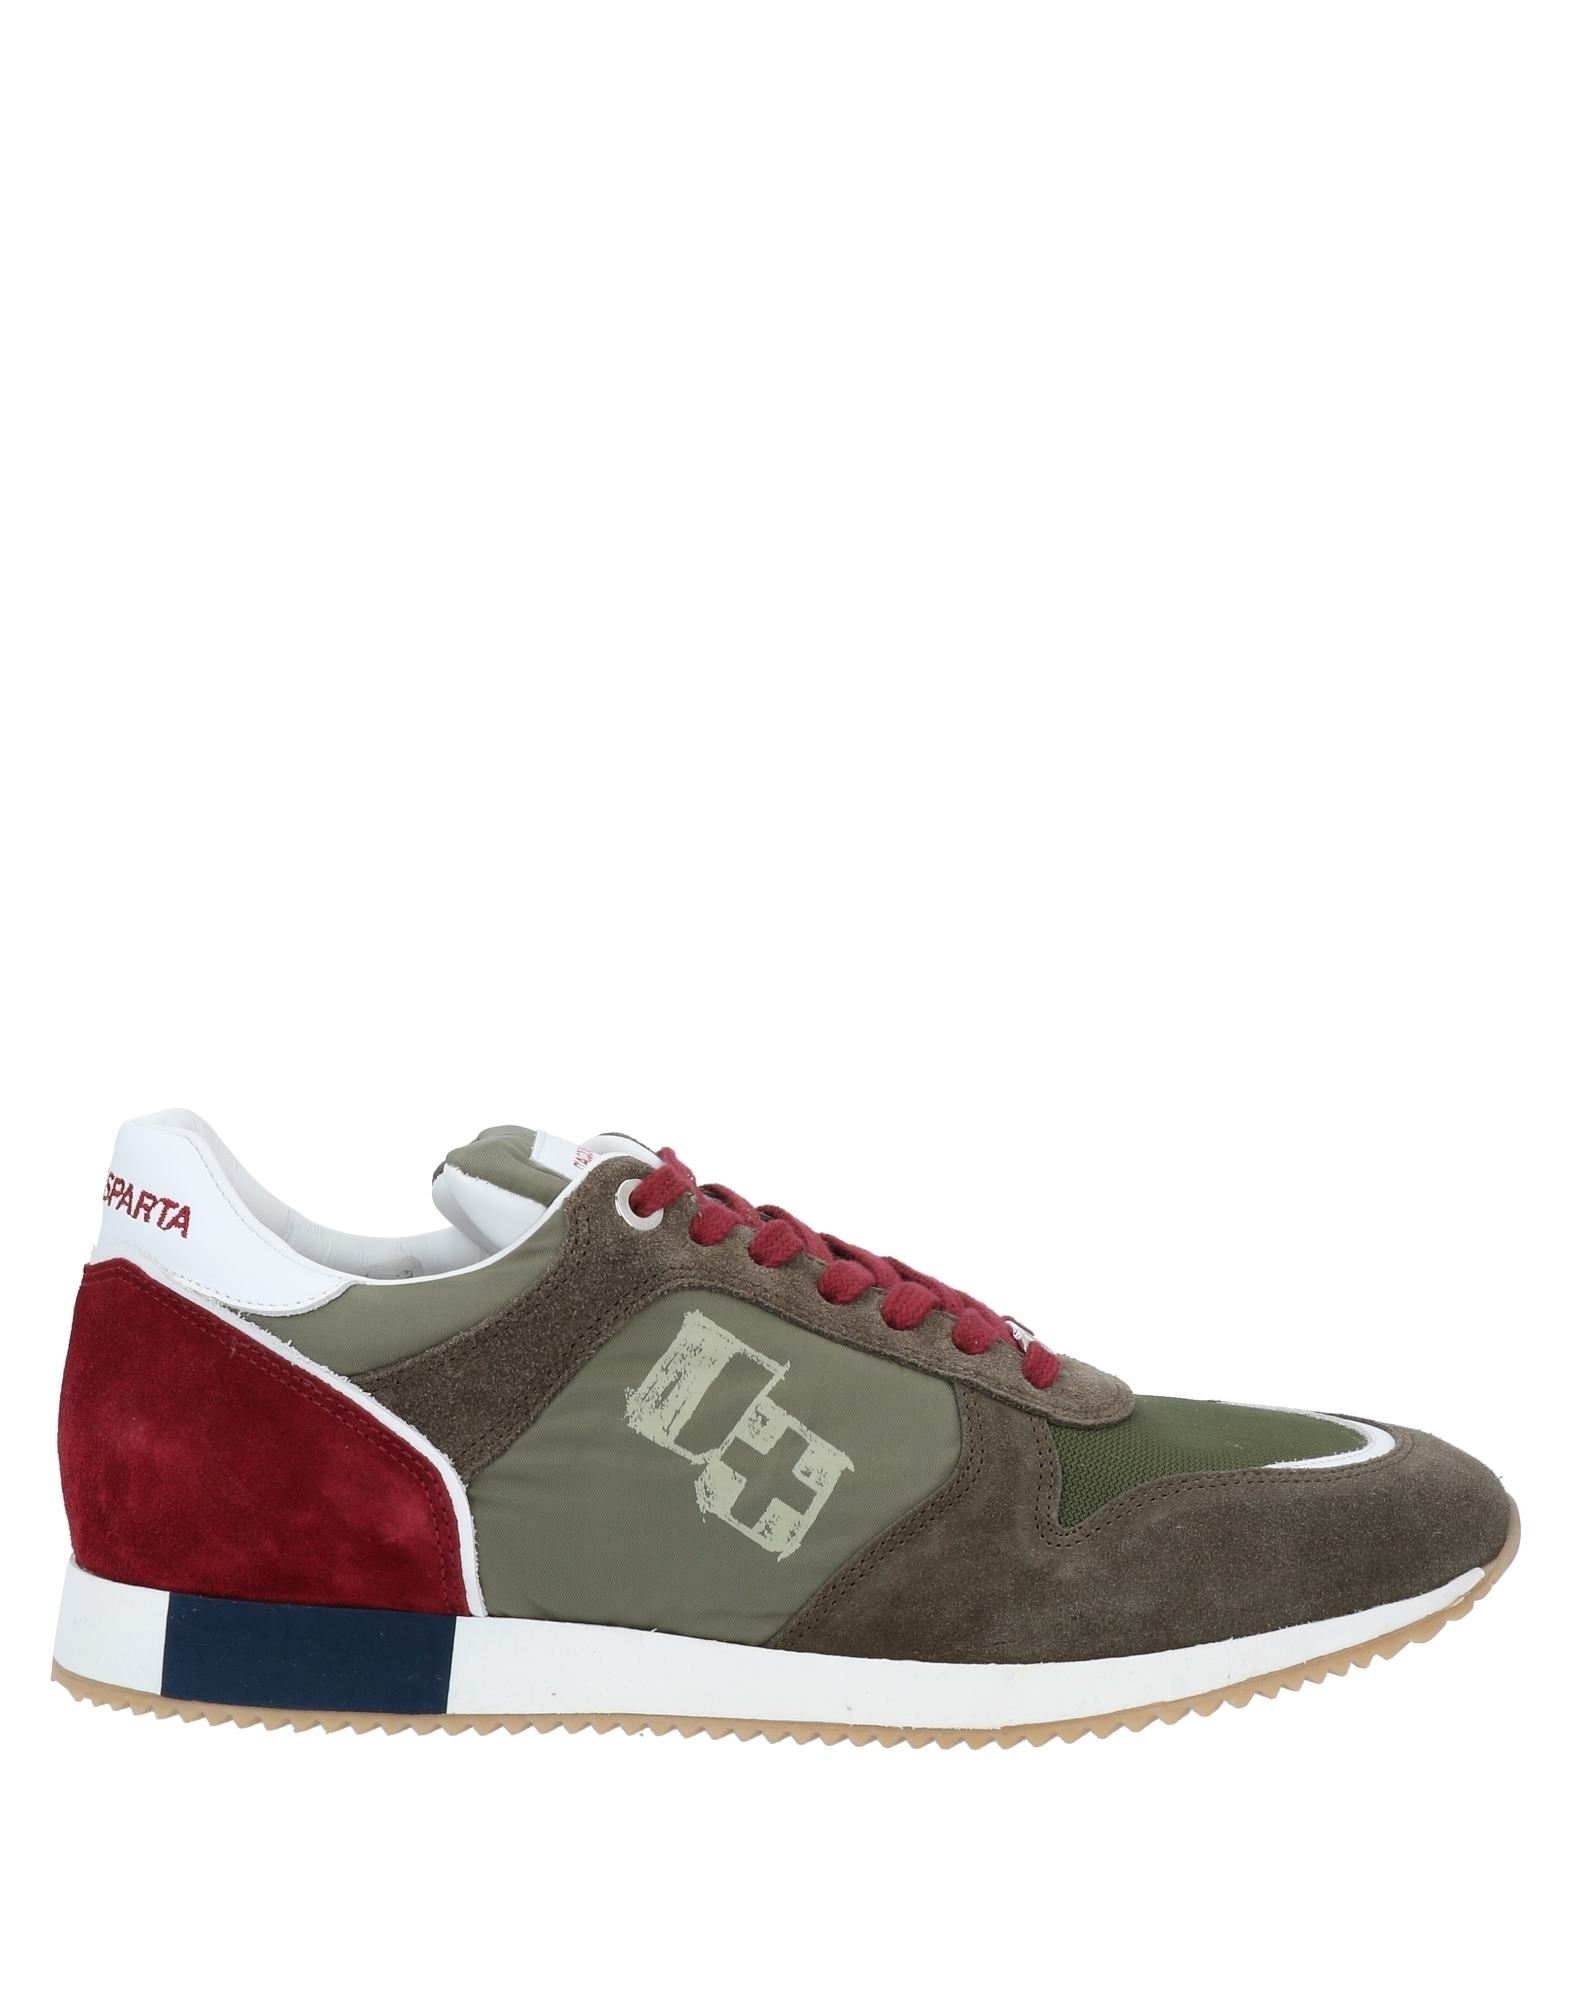 D'acquasparta Sneakers In Military Green | ModeSens